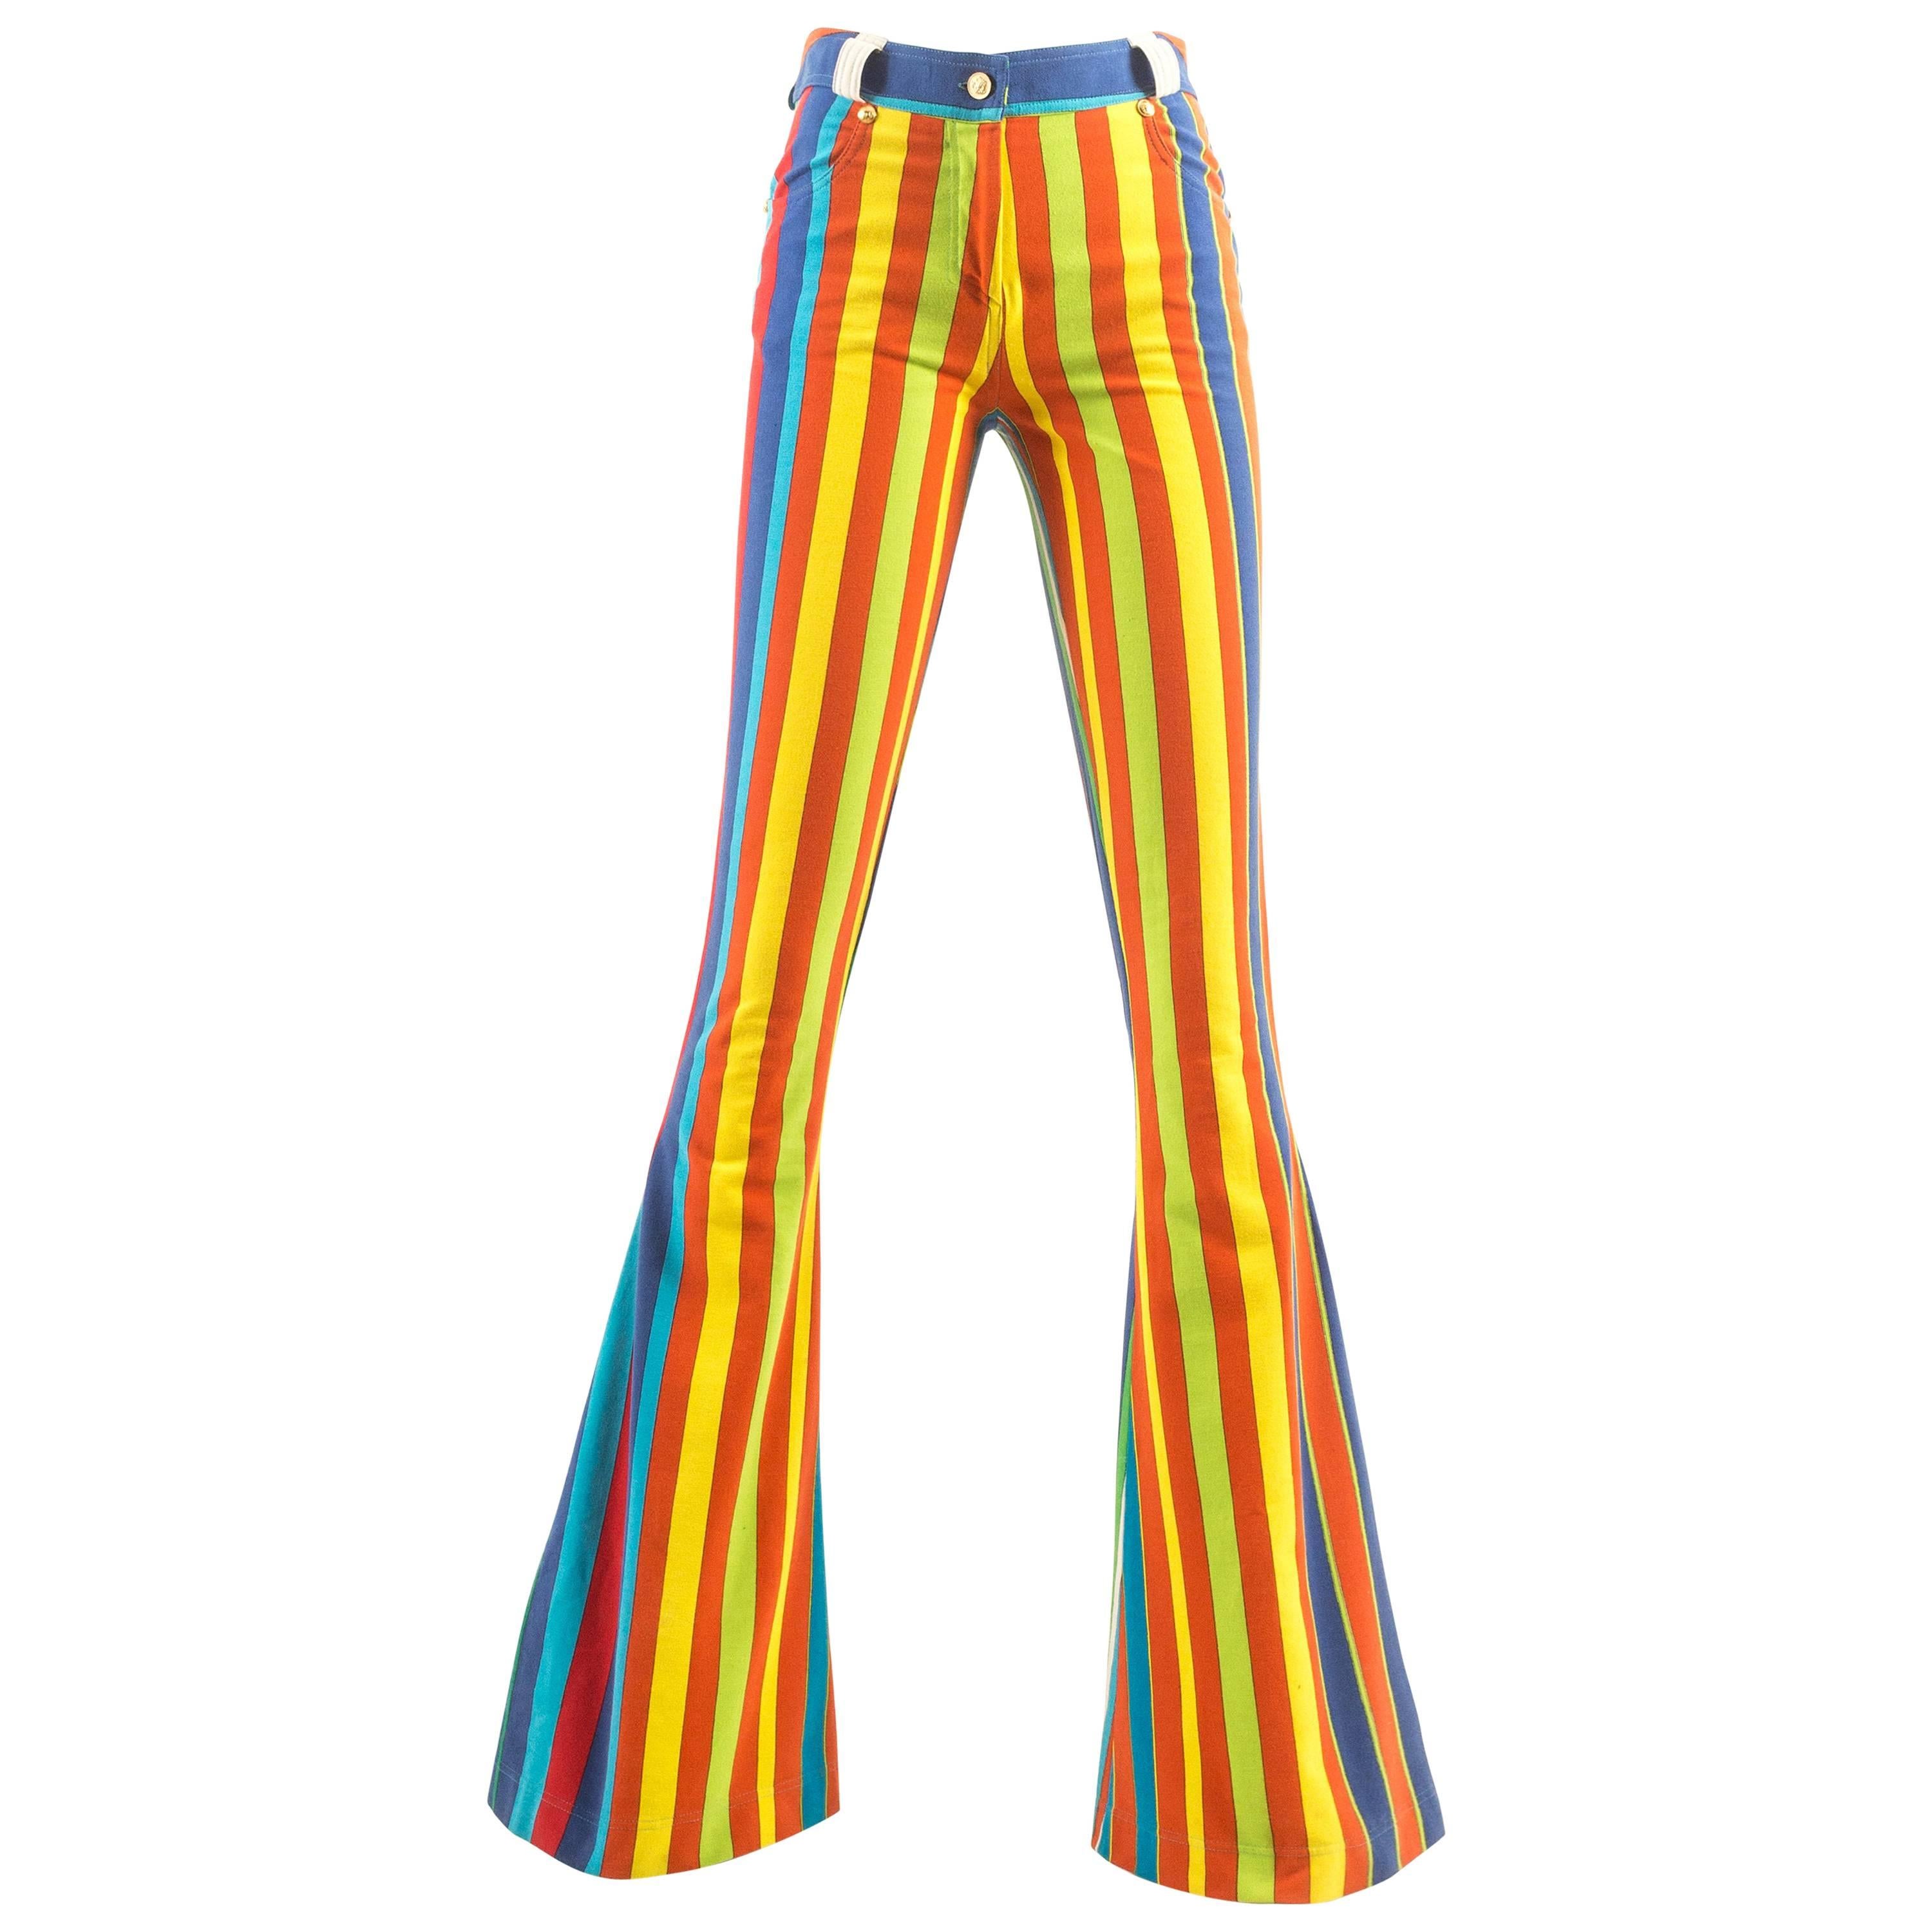 Gianni Versace striped extra wide flared pants, Spring-Summer 1993 